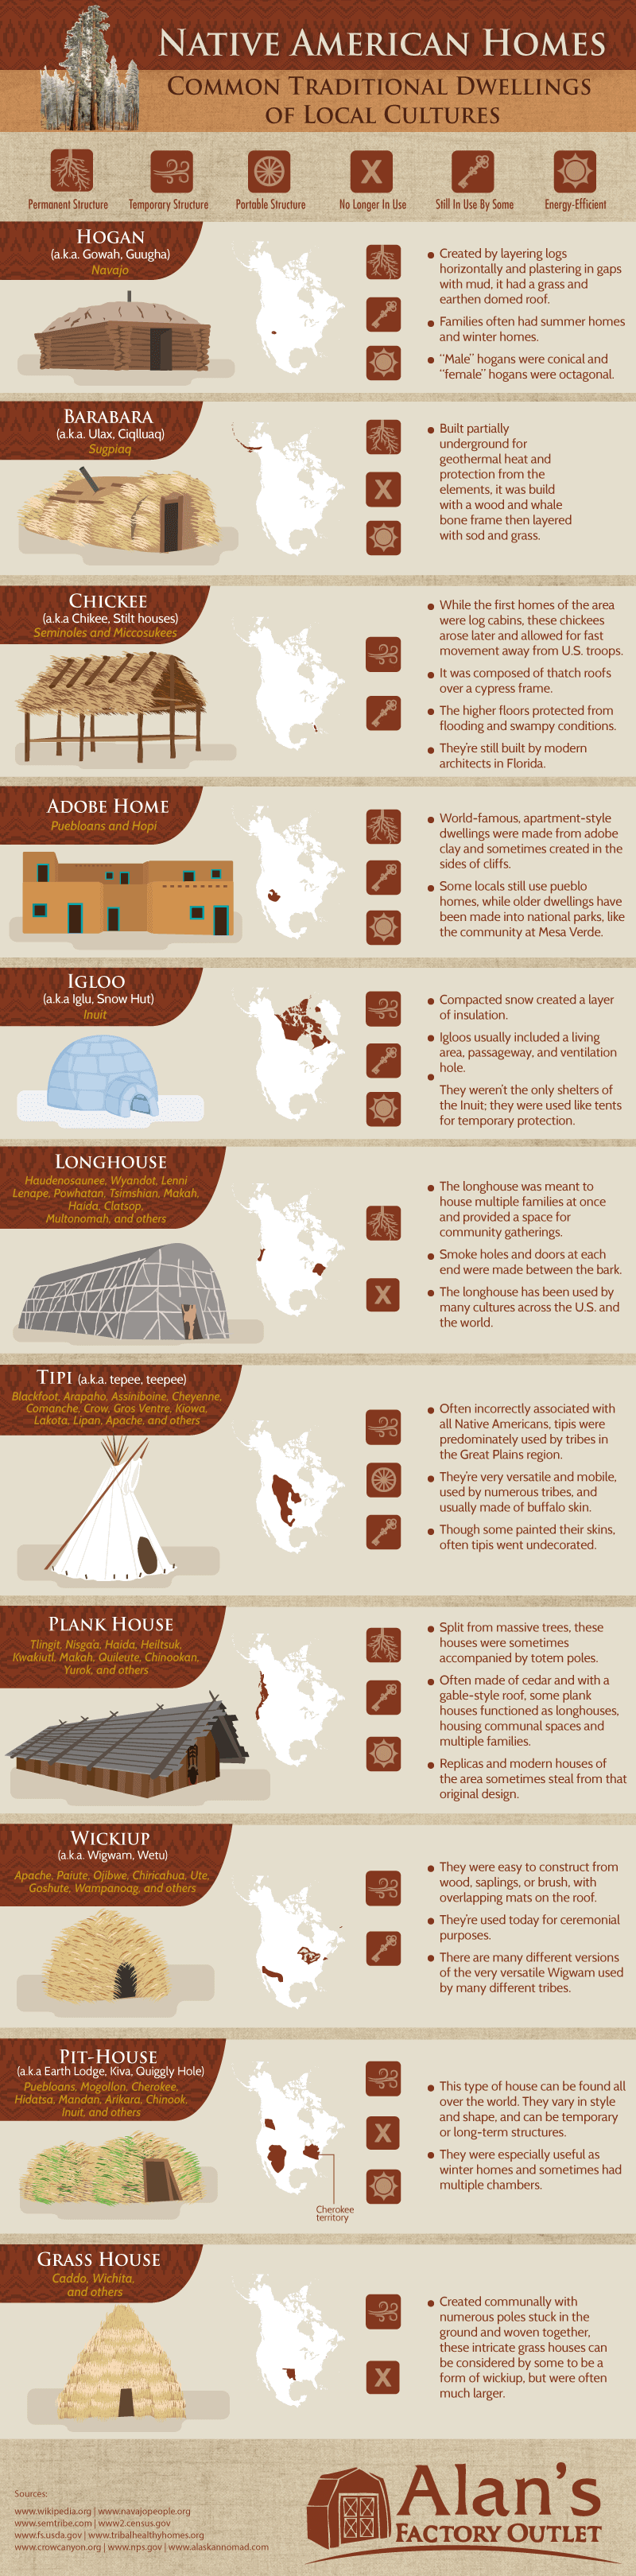 native-american-homes-4.png